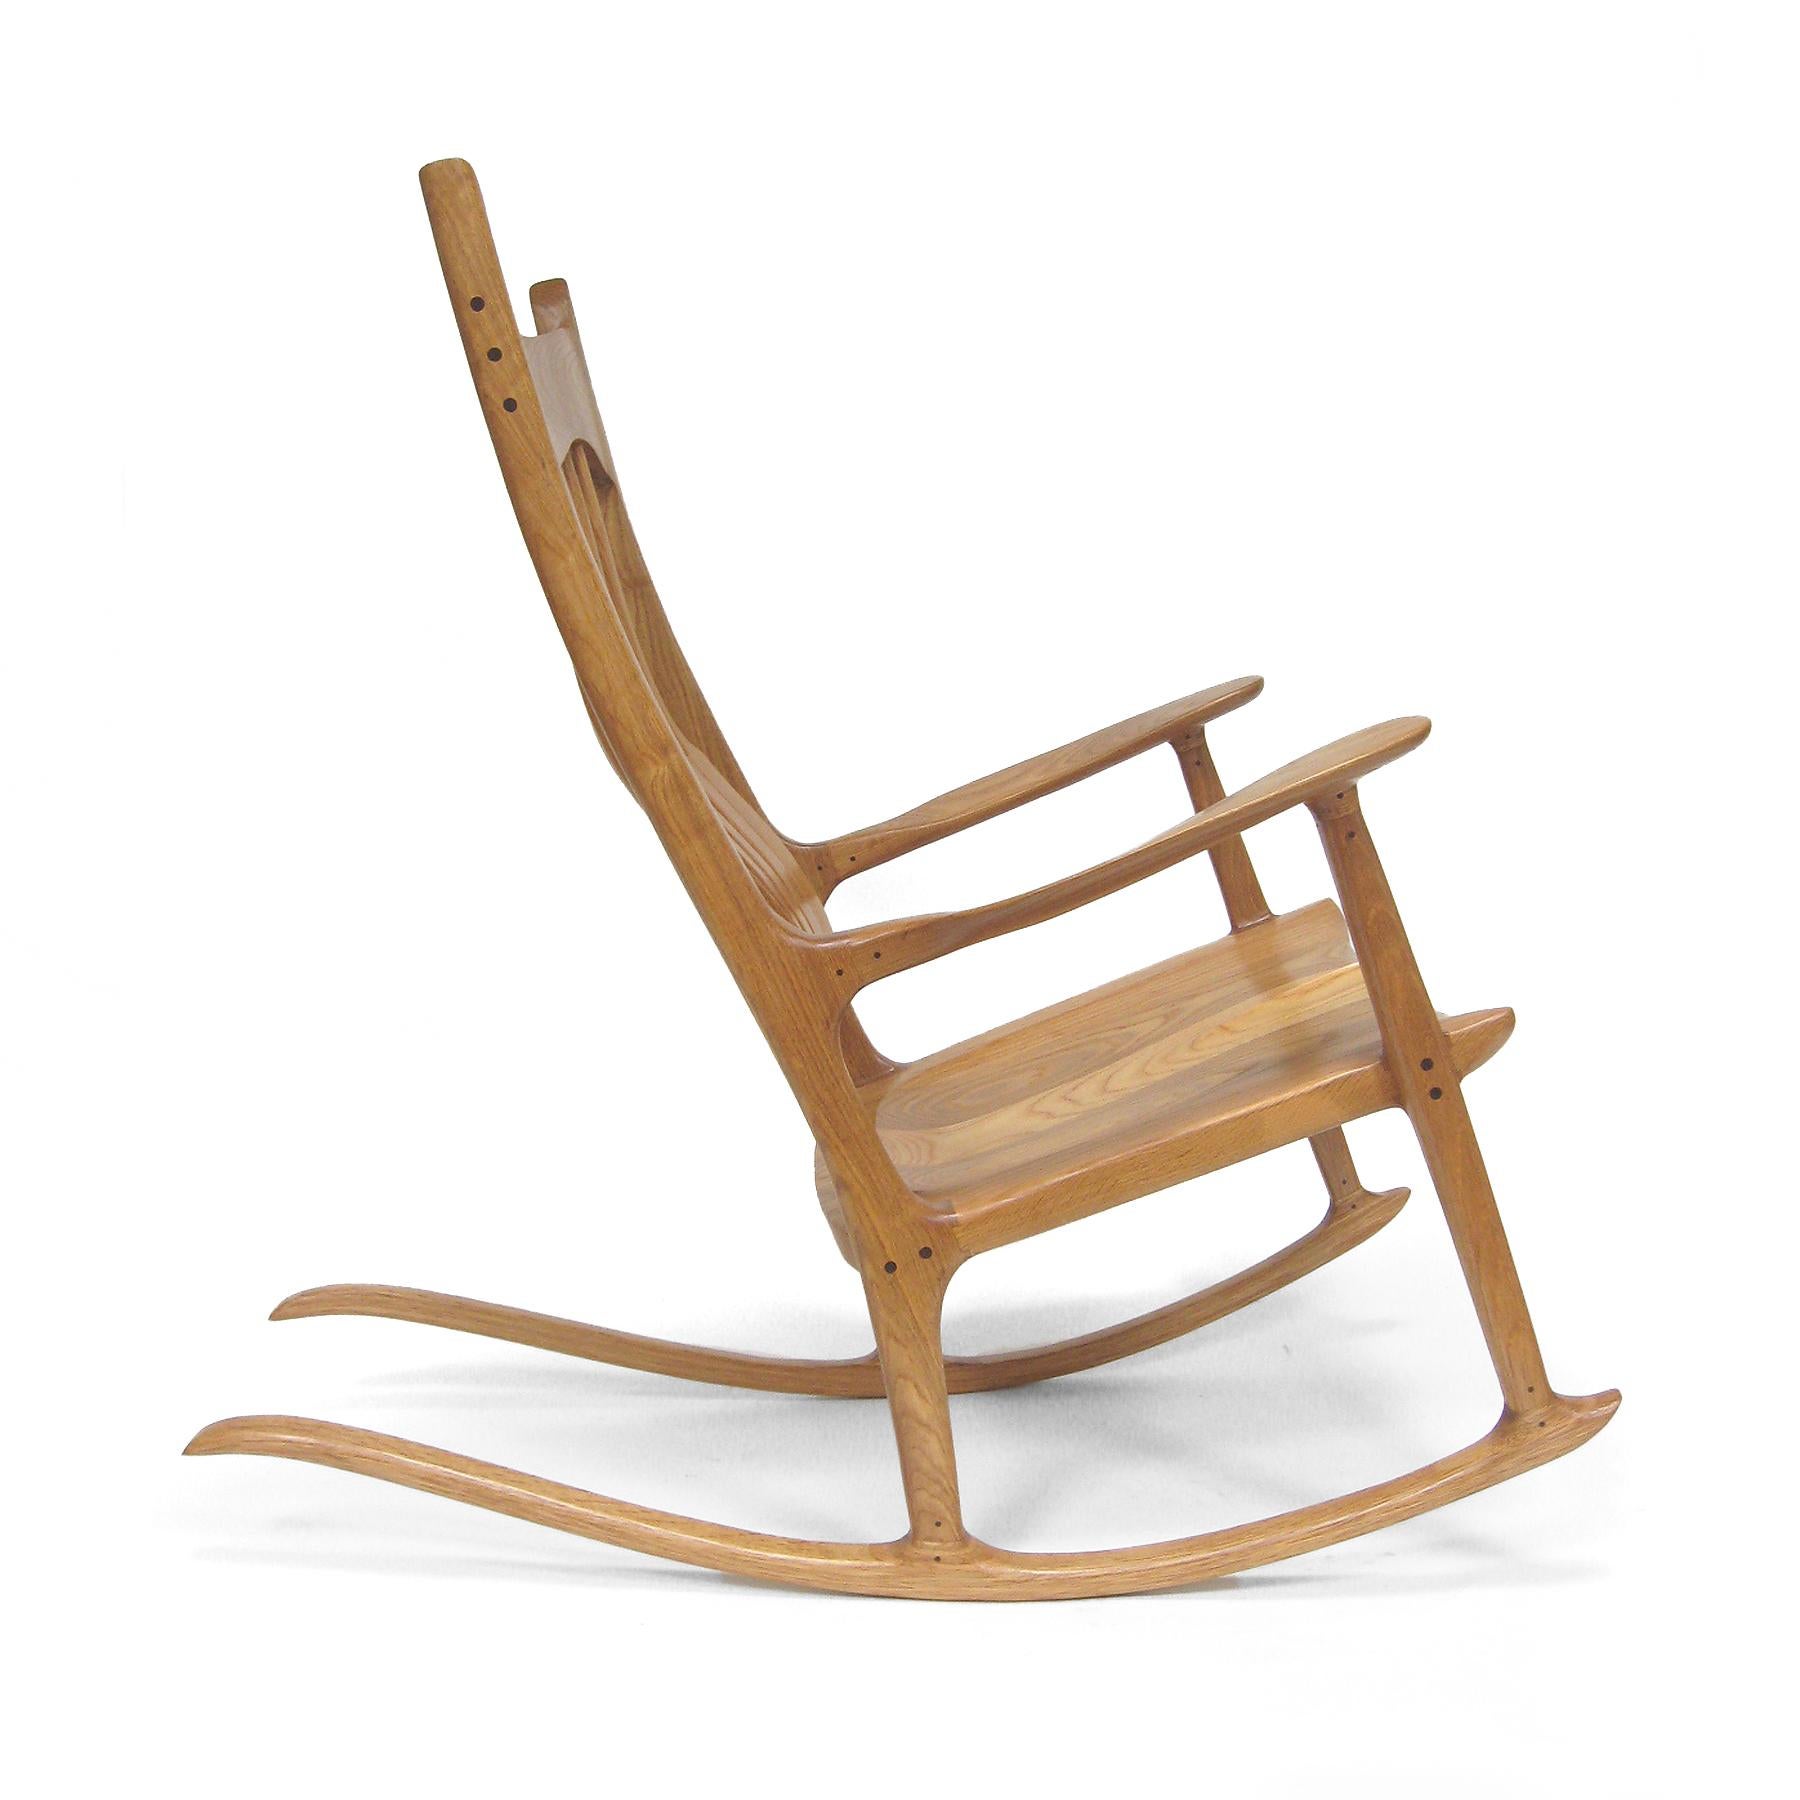 maloof inspired rocking chair